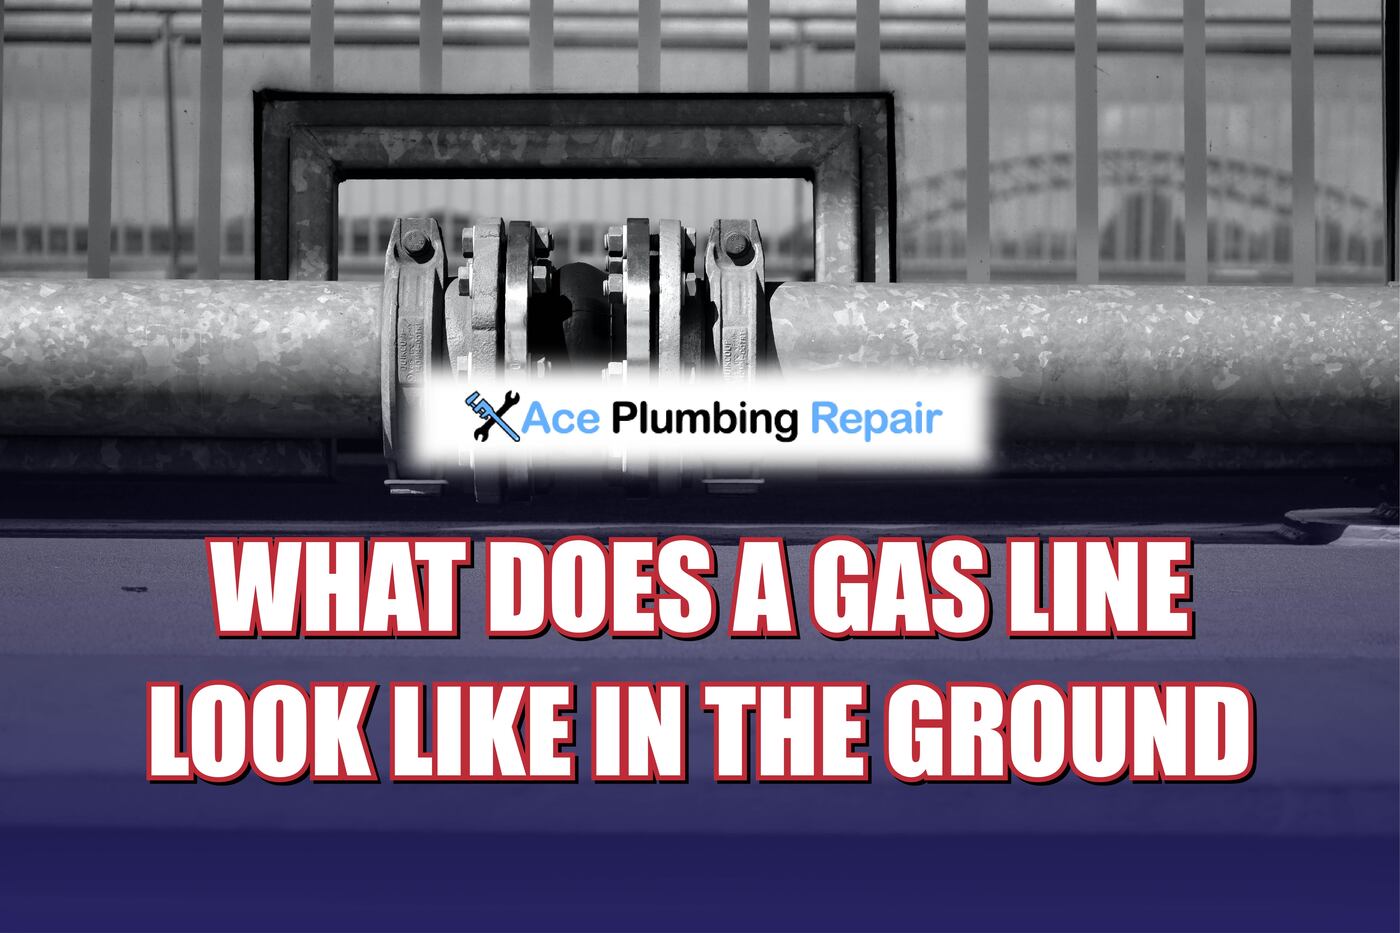 what does a gas line look like in the ground?